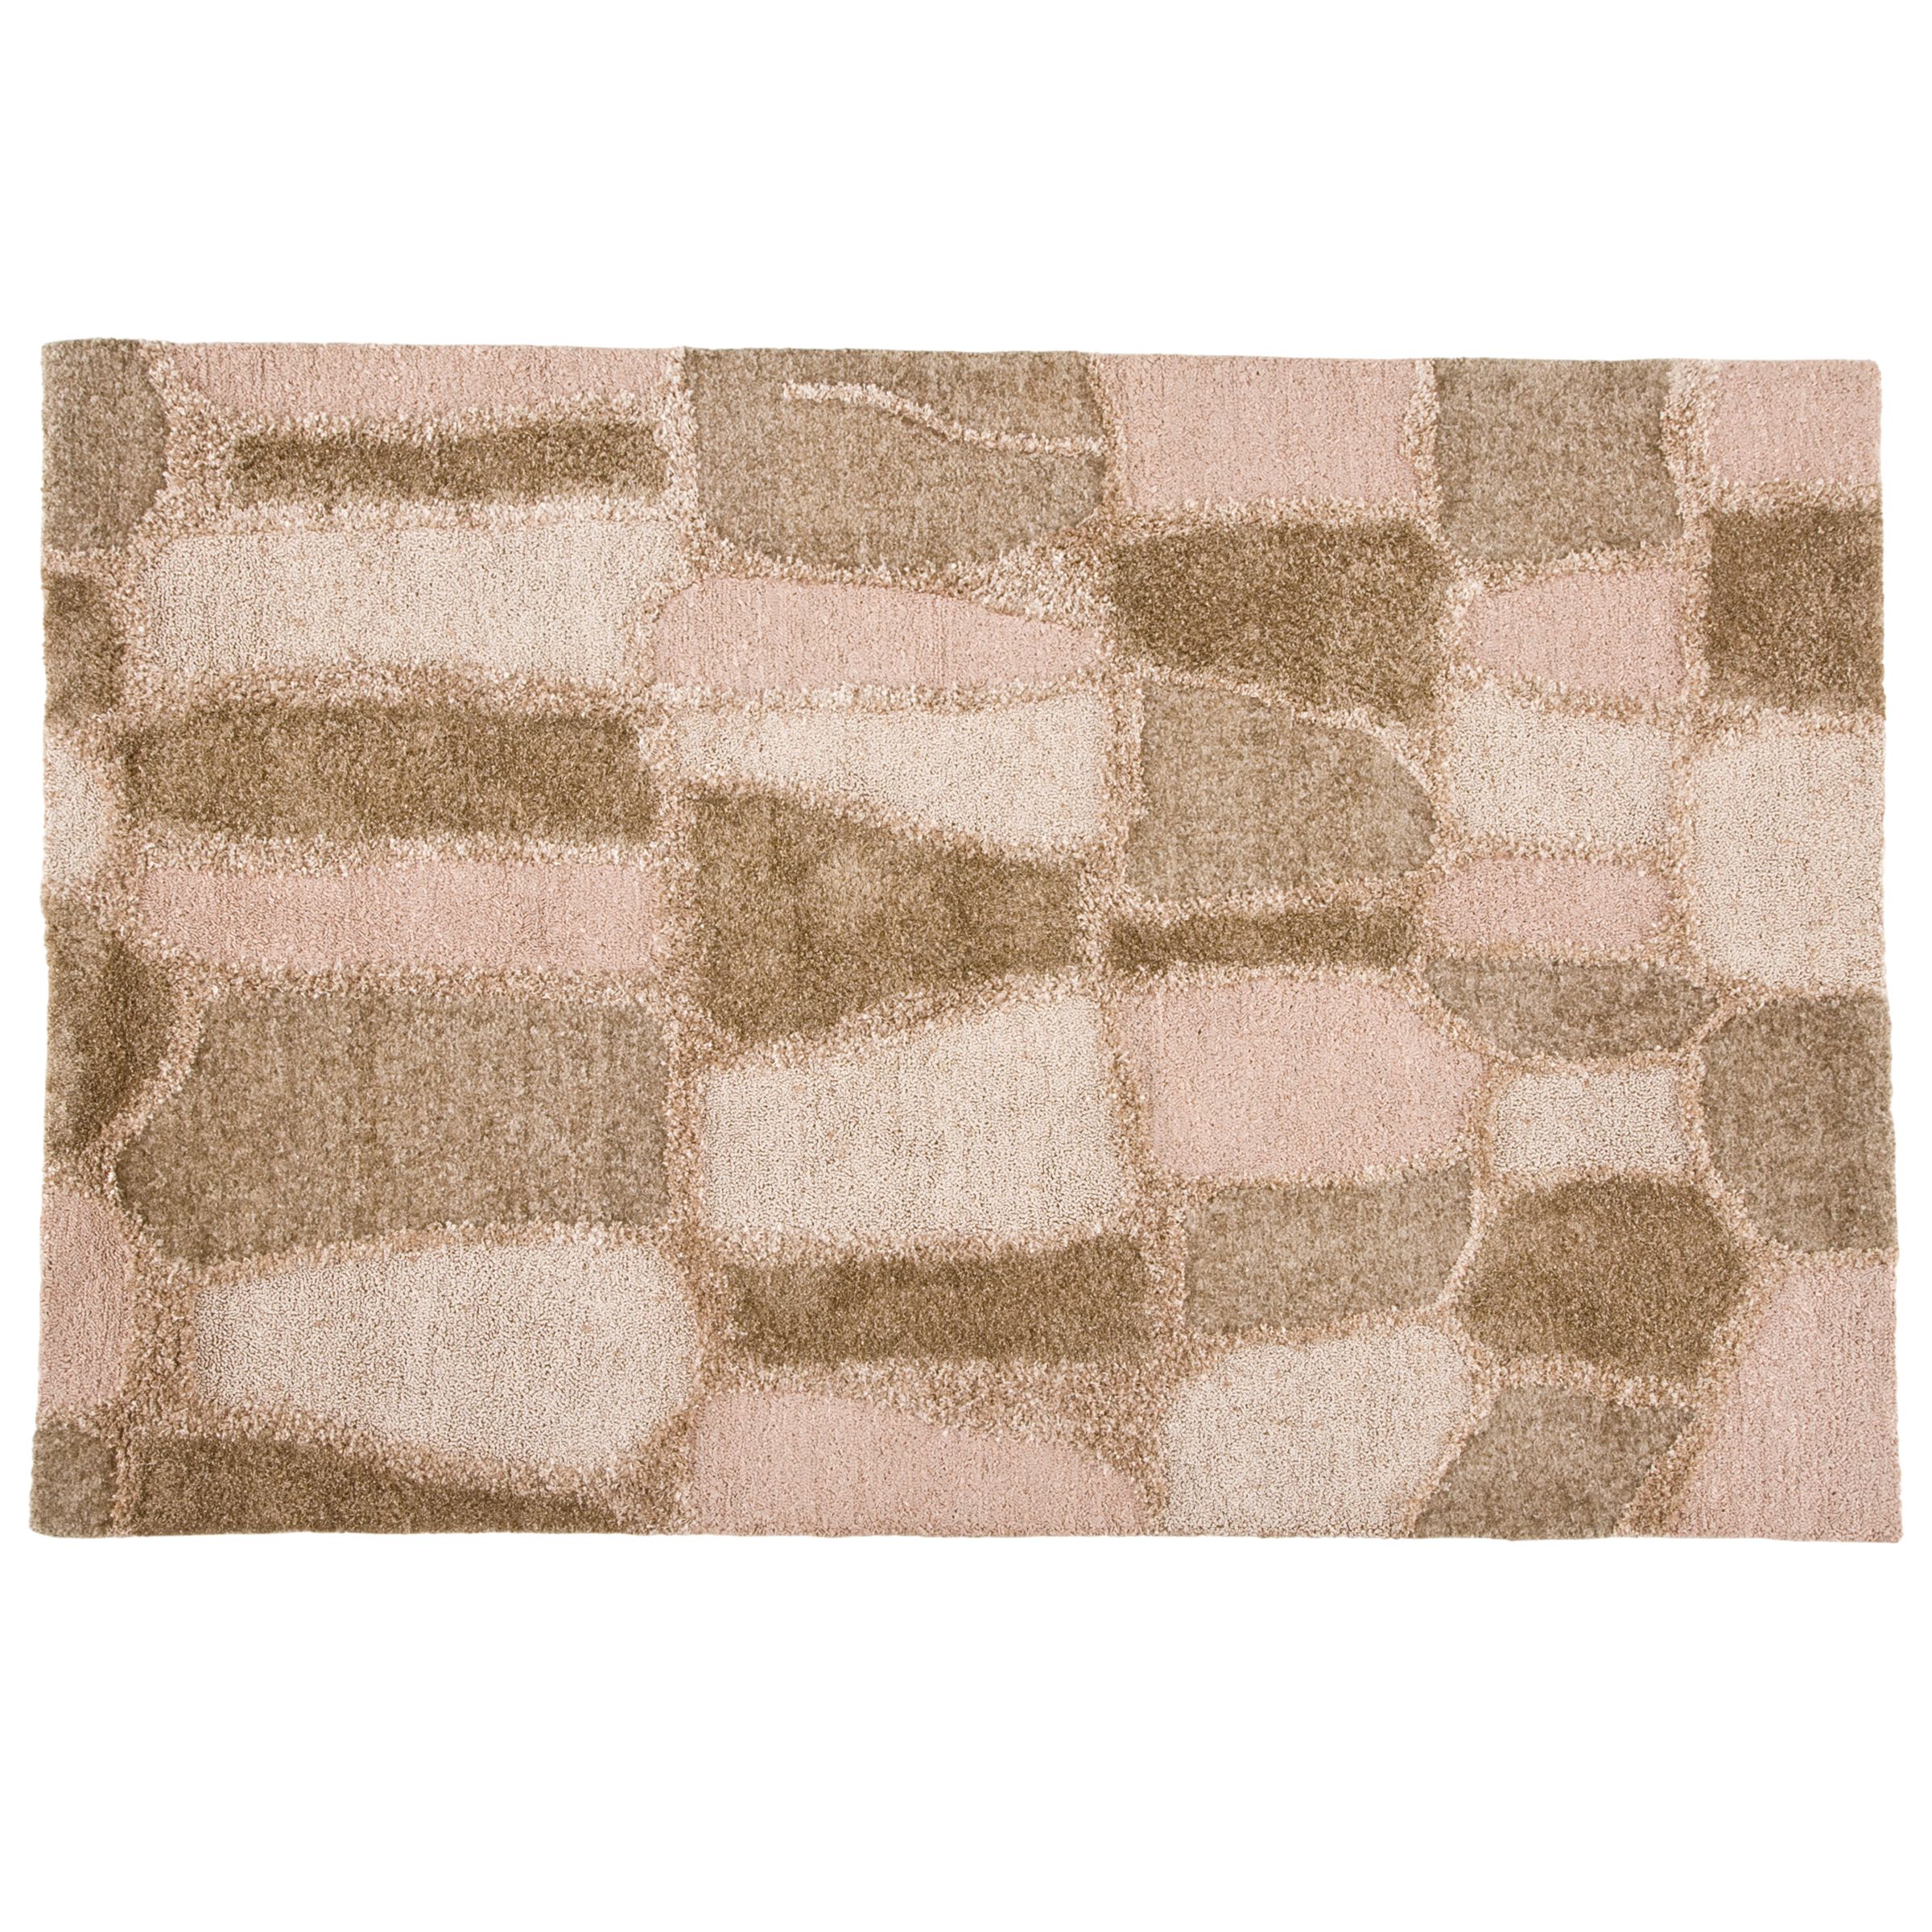 Boutique Rugs, Beige at JohnLewis